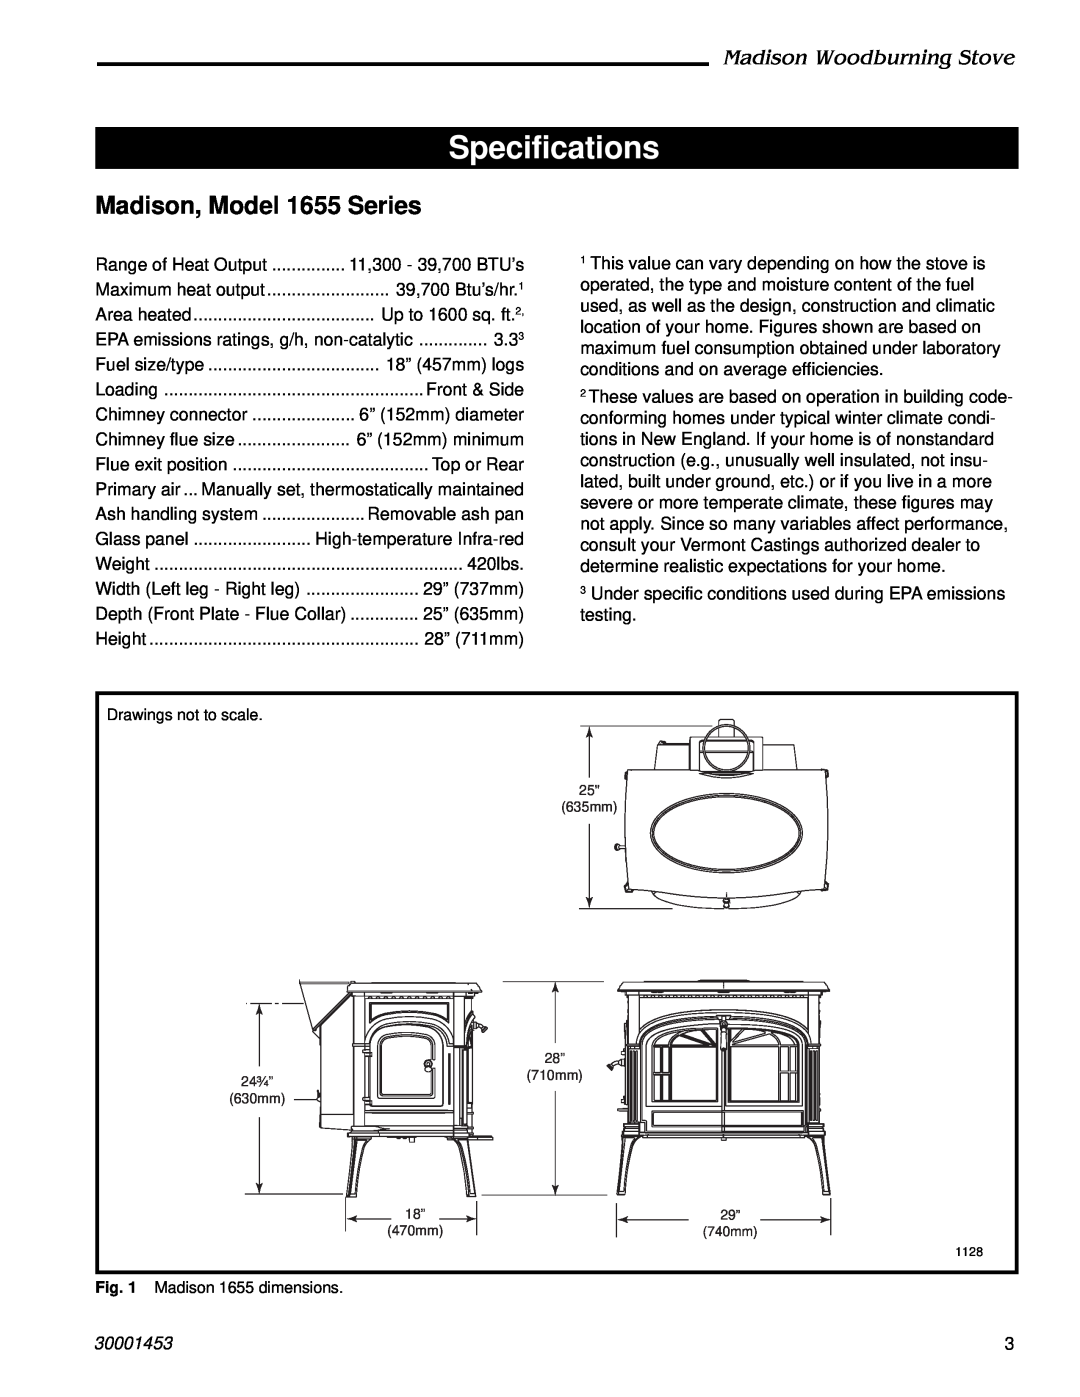 Vermont Casting 410 Specifications, Madison, Model 1655 Series, Madison Woodburning Stove, 30001453 